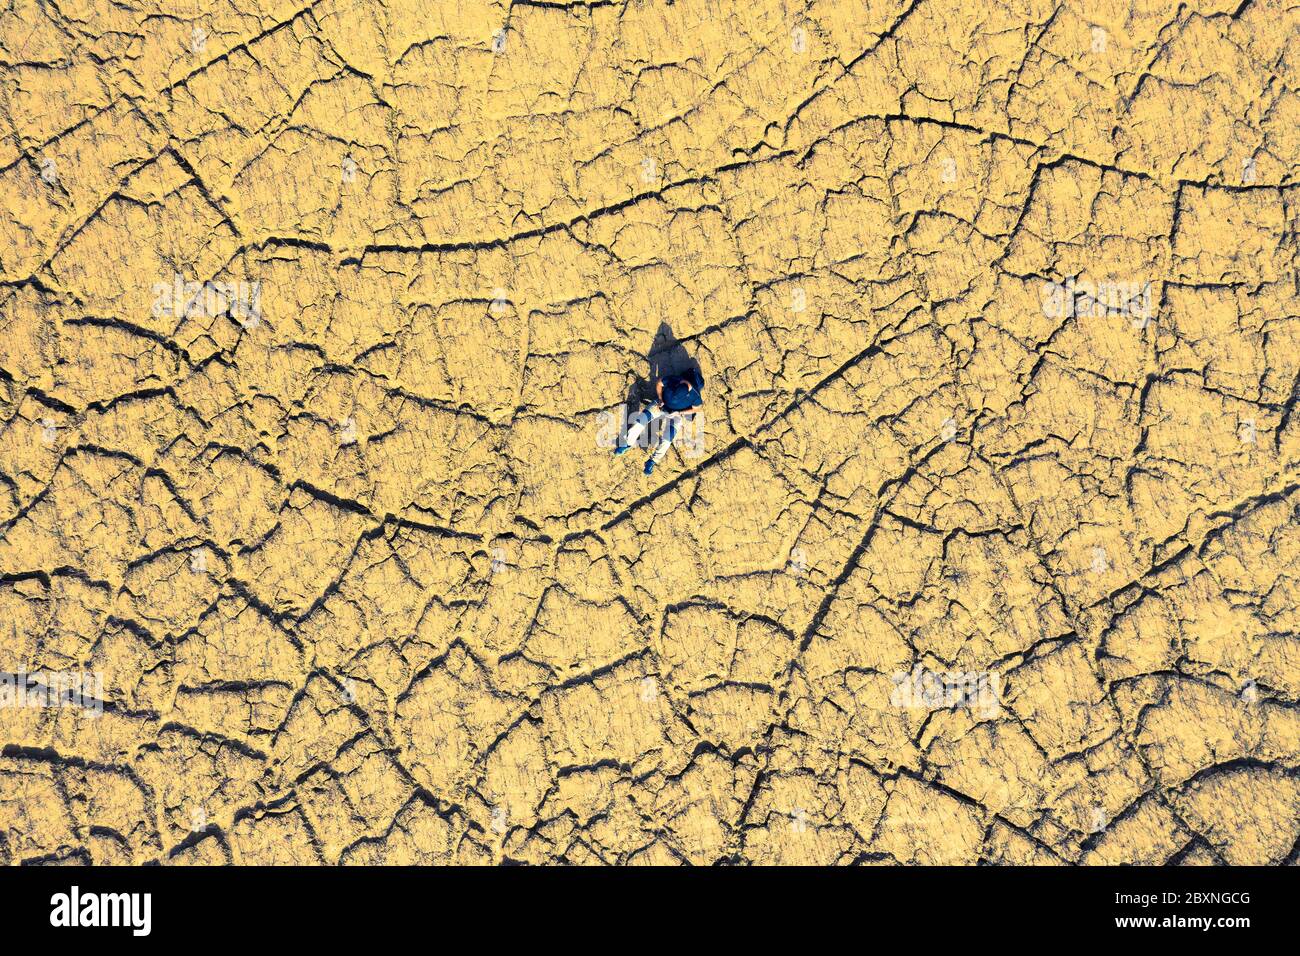 Man seated in a land cracked by drought. Stock Photo